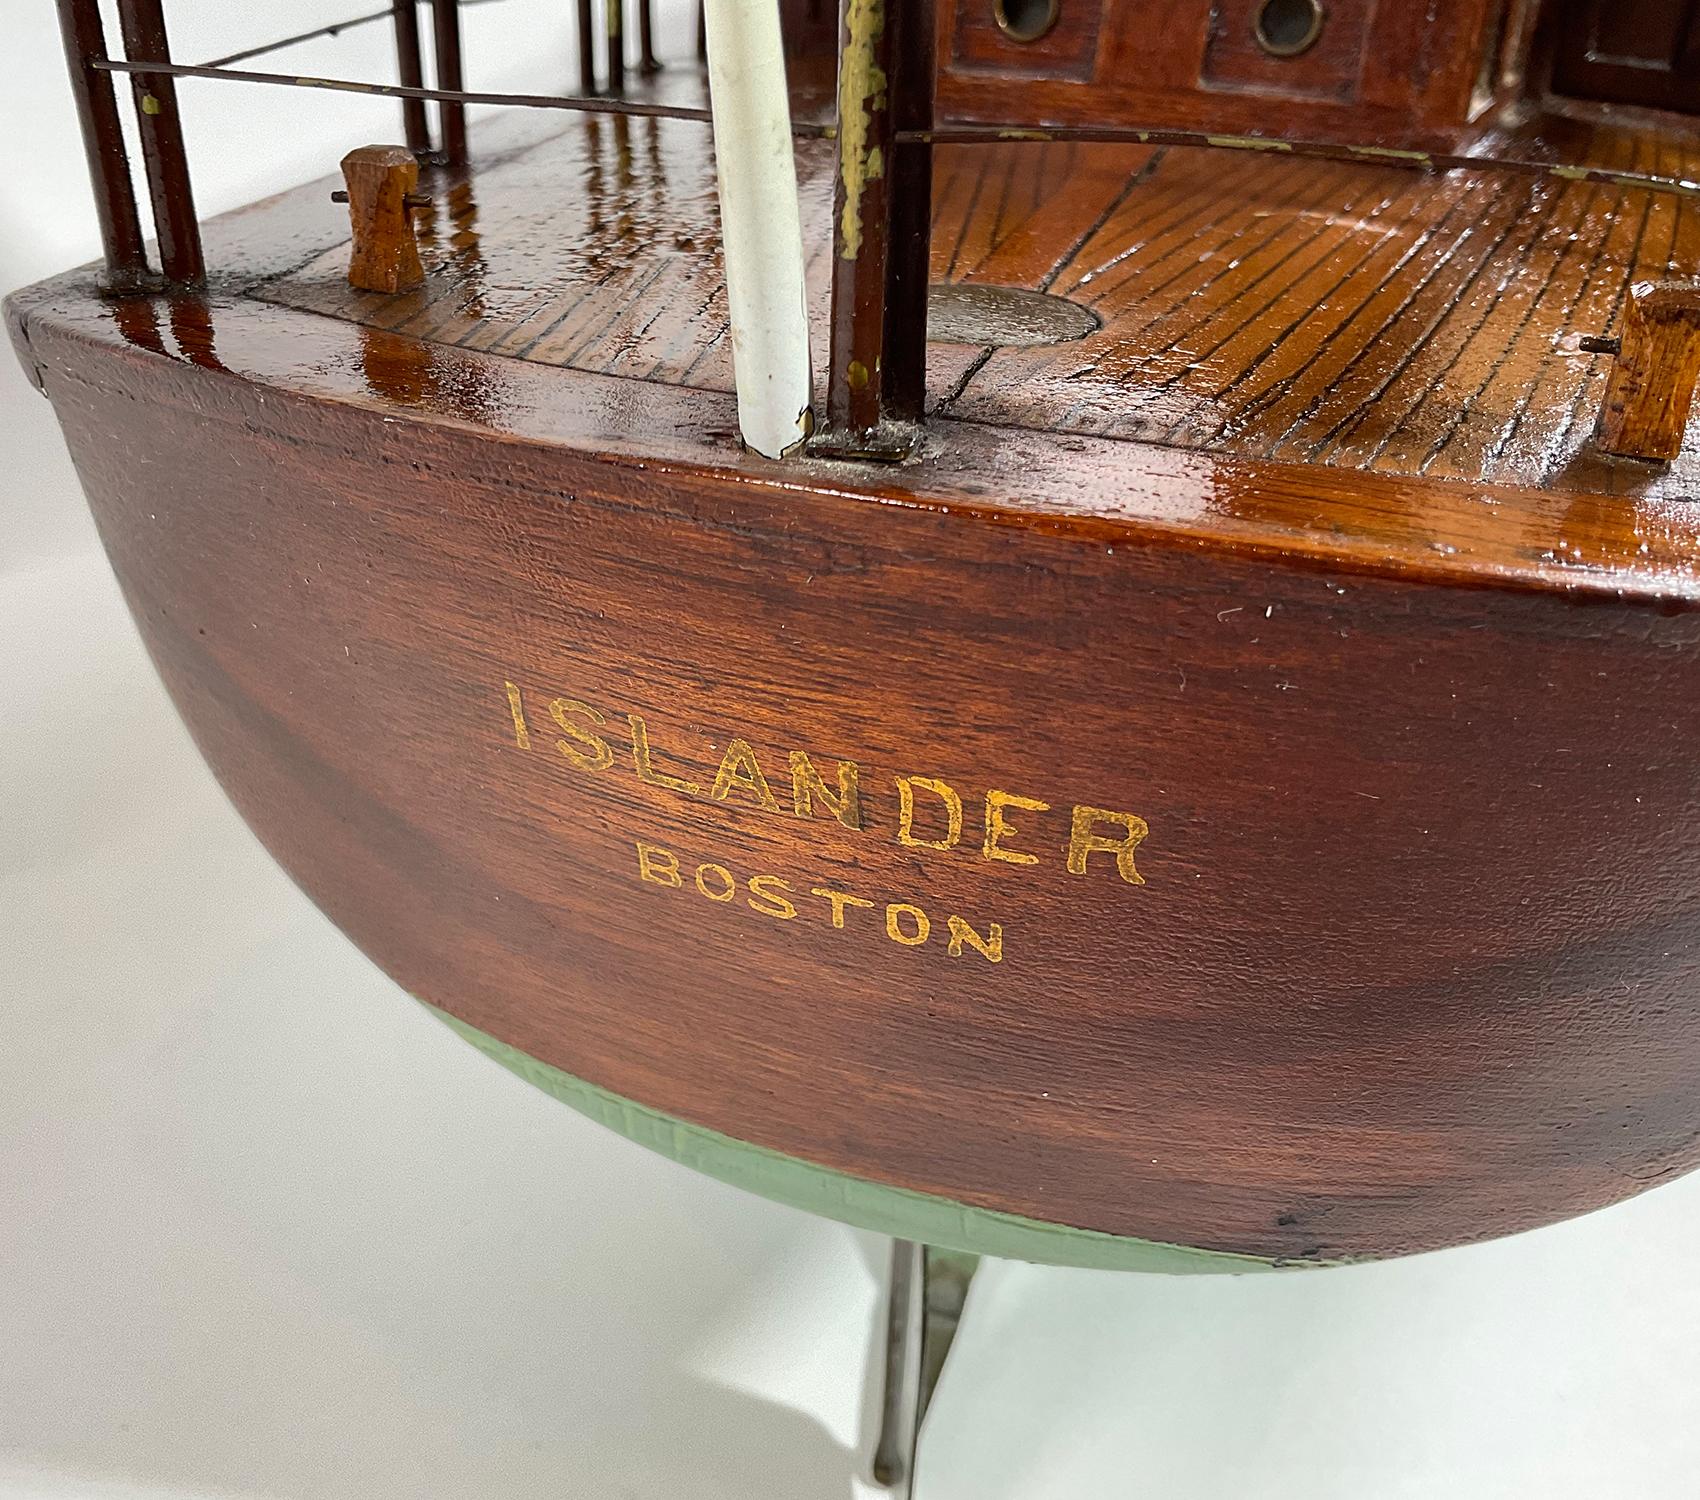 Planked Model of the 1920s Boston Yacht Islander For Sale 5